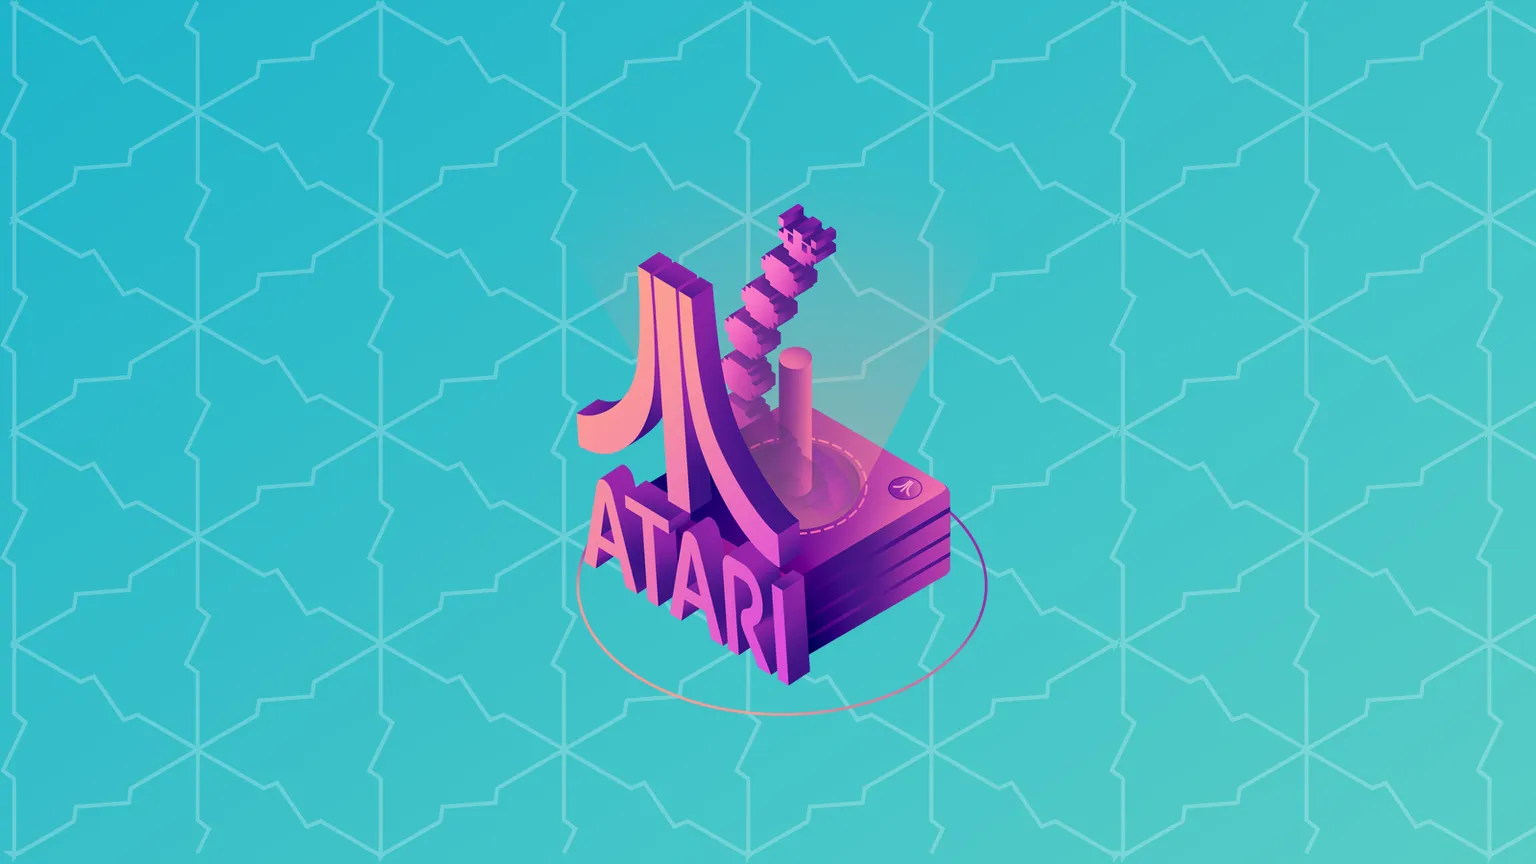 Atari Token is the veteran gaming company's first entry into the crypto space. Image: Decrypt